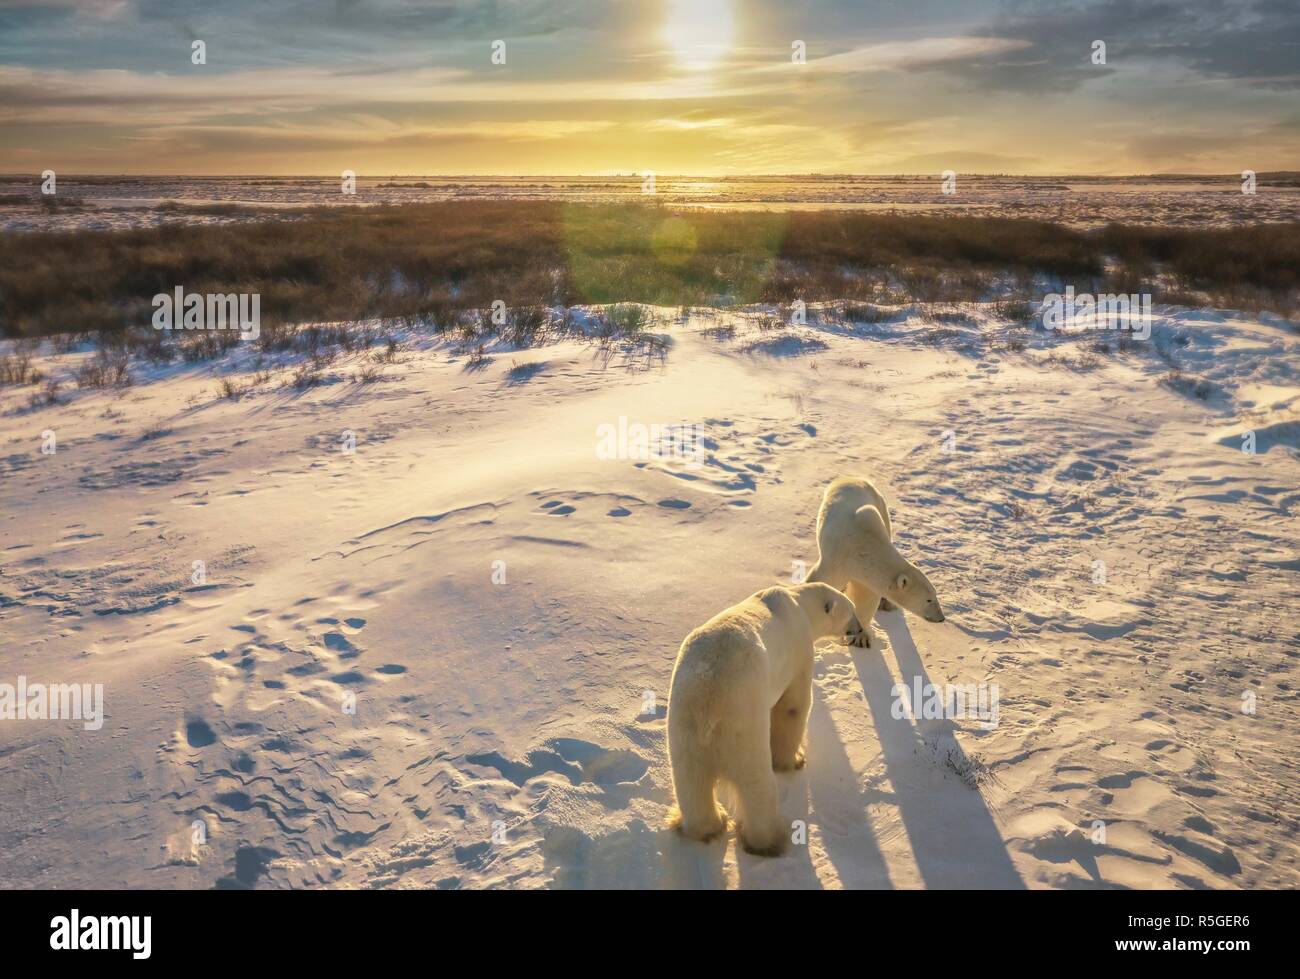 Two adult polar bears together in their natural Arctic snowy tundra habitat, as the sunrise casts golden light on the wide landscape scene. Churchill, Stock Photo